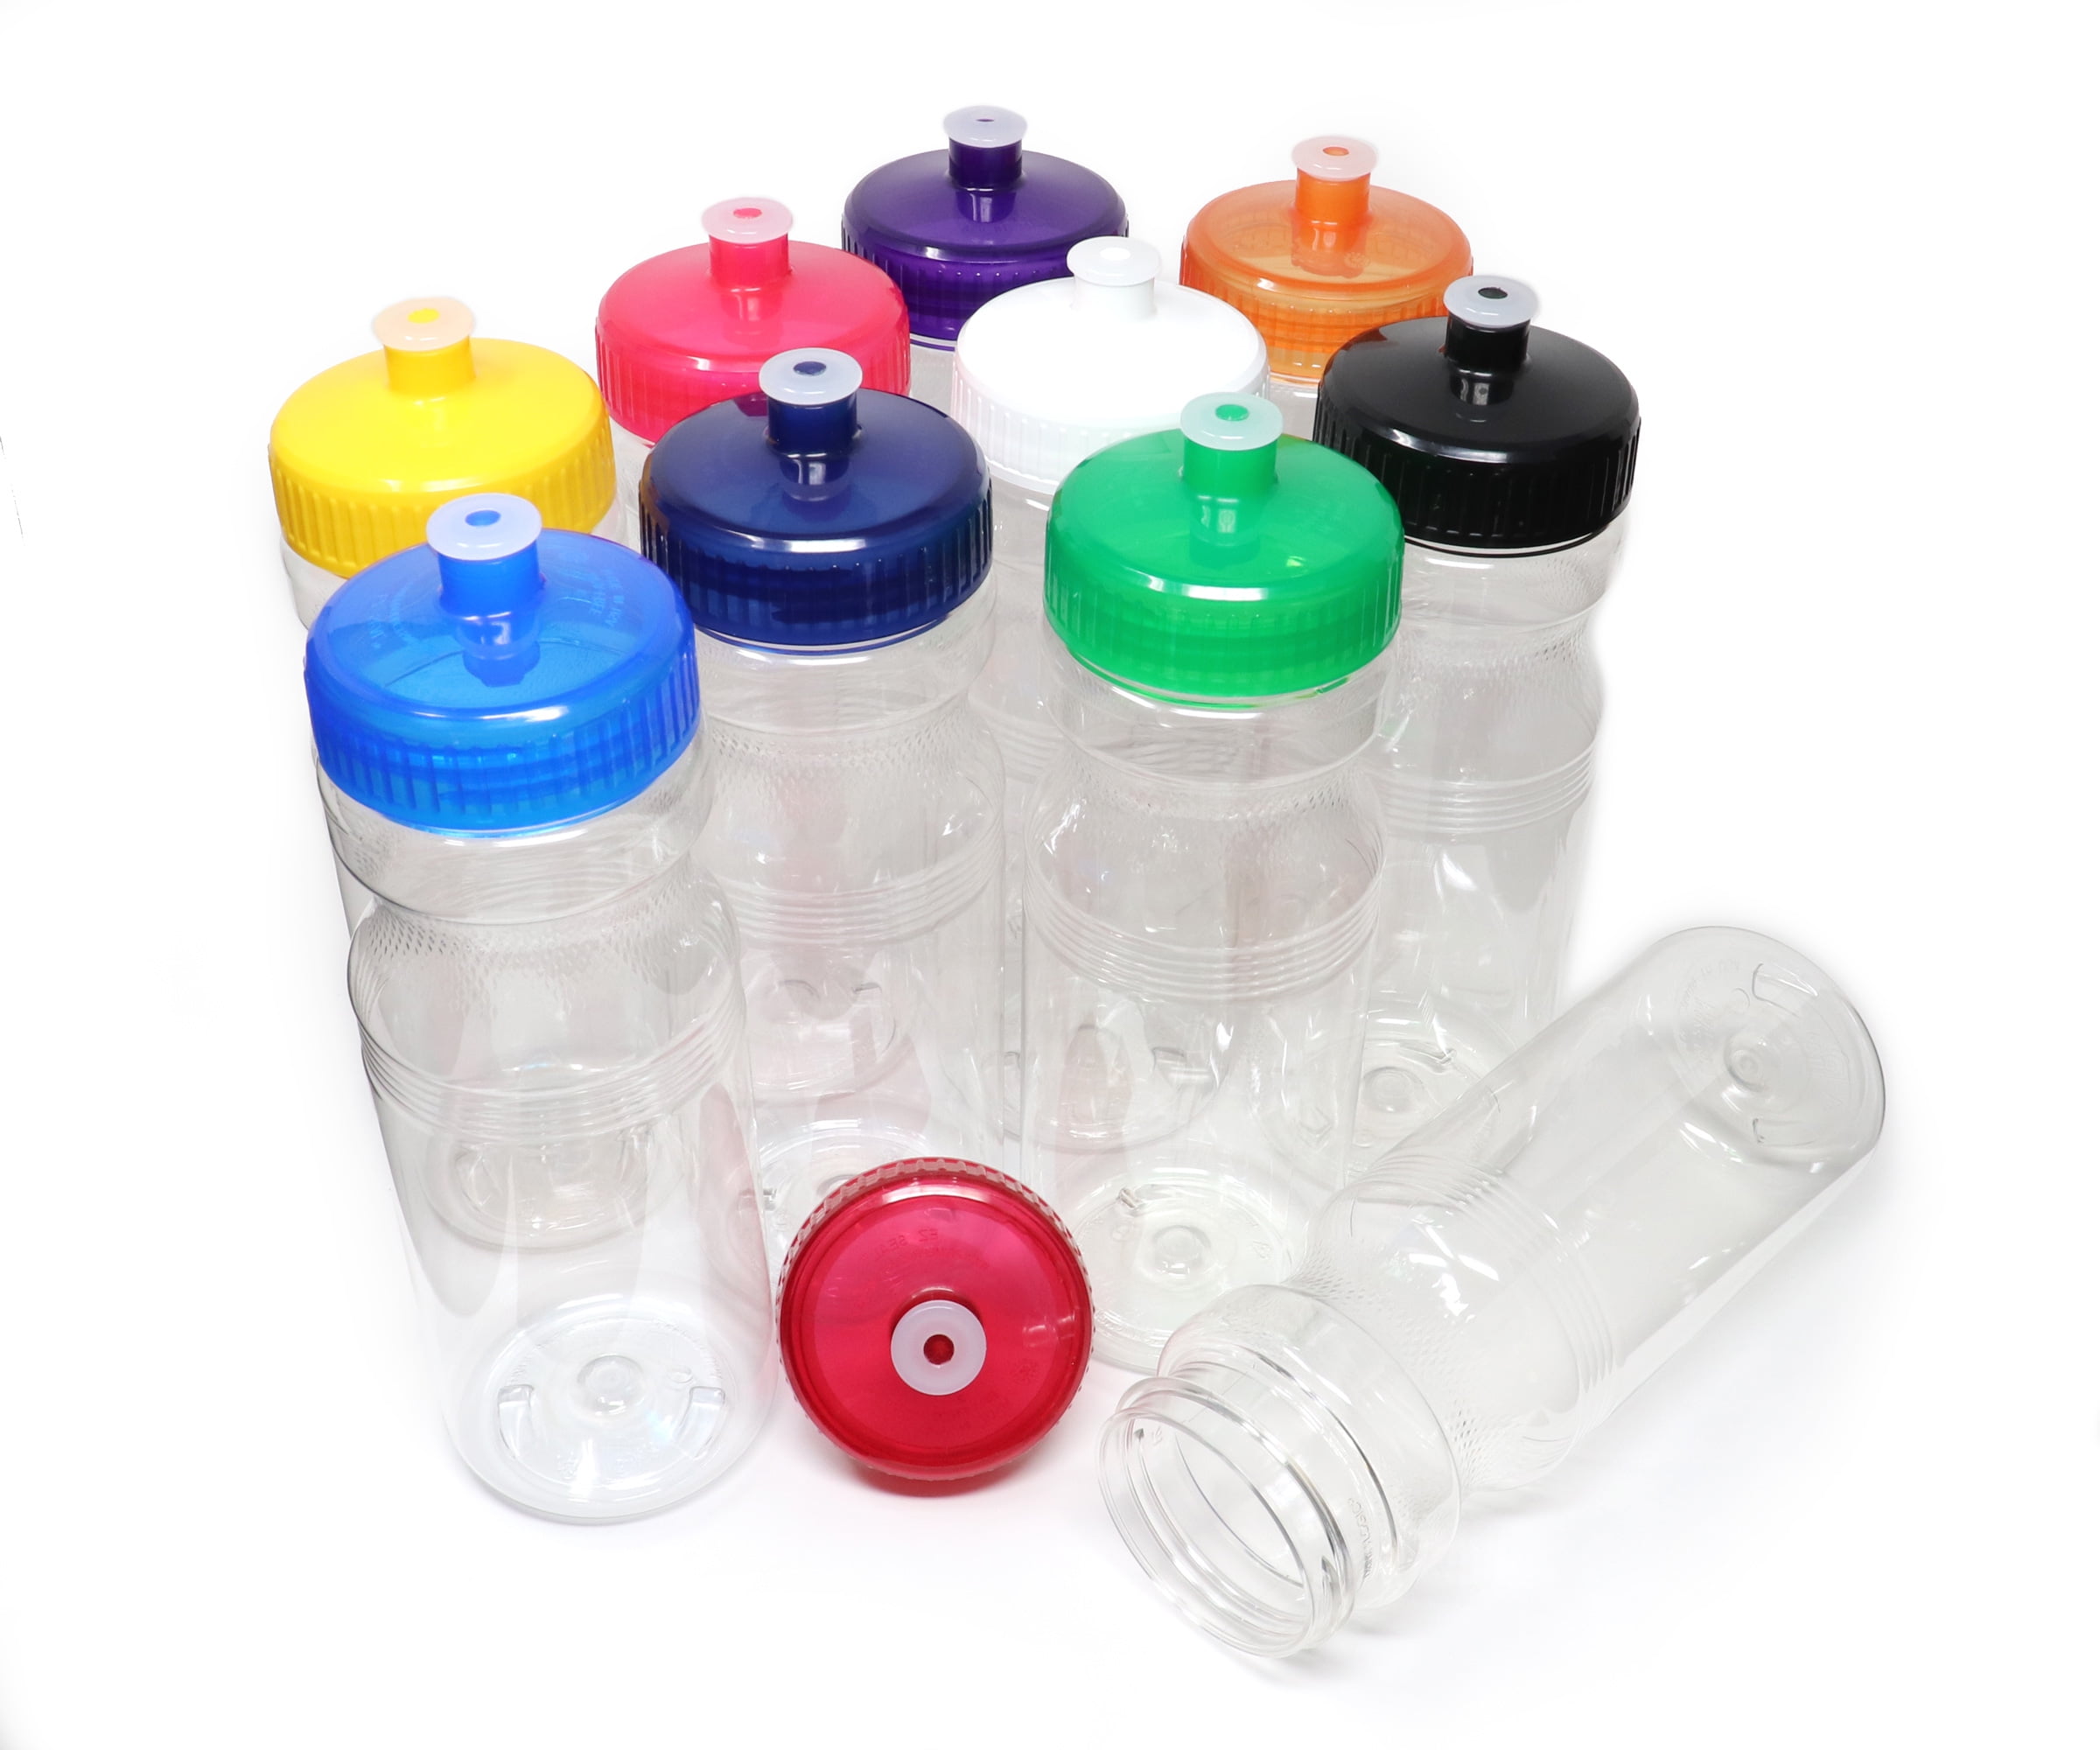 10 Of The Highest-Rated BPA-Free Water Bottles On